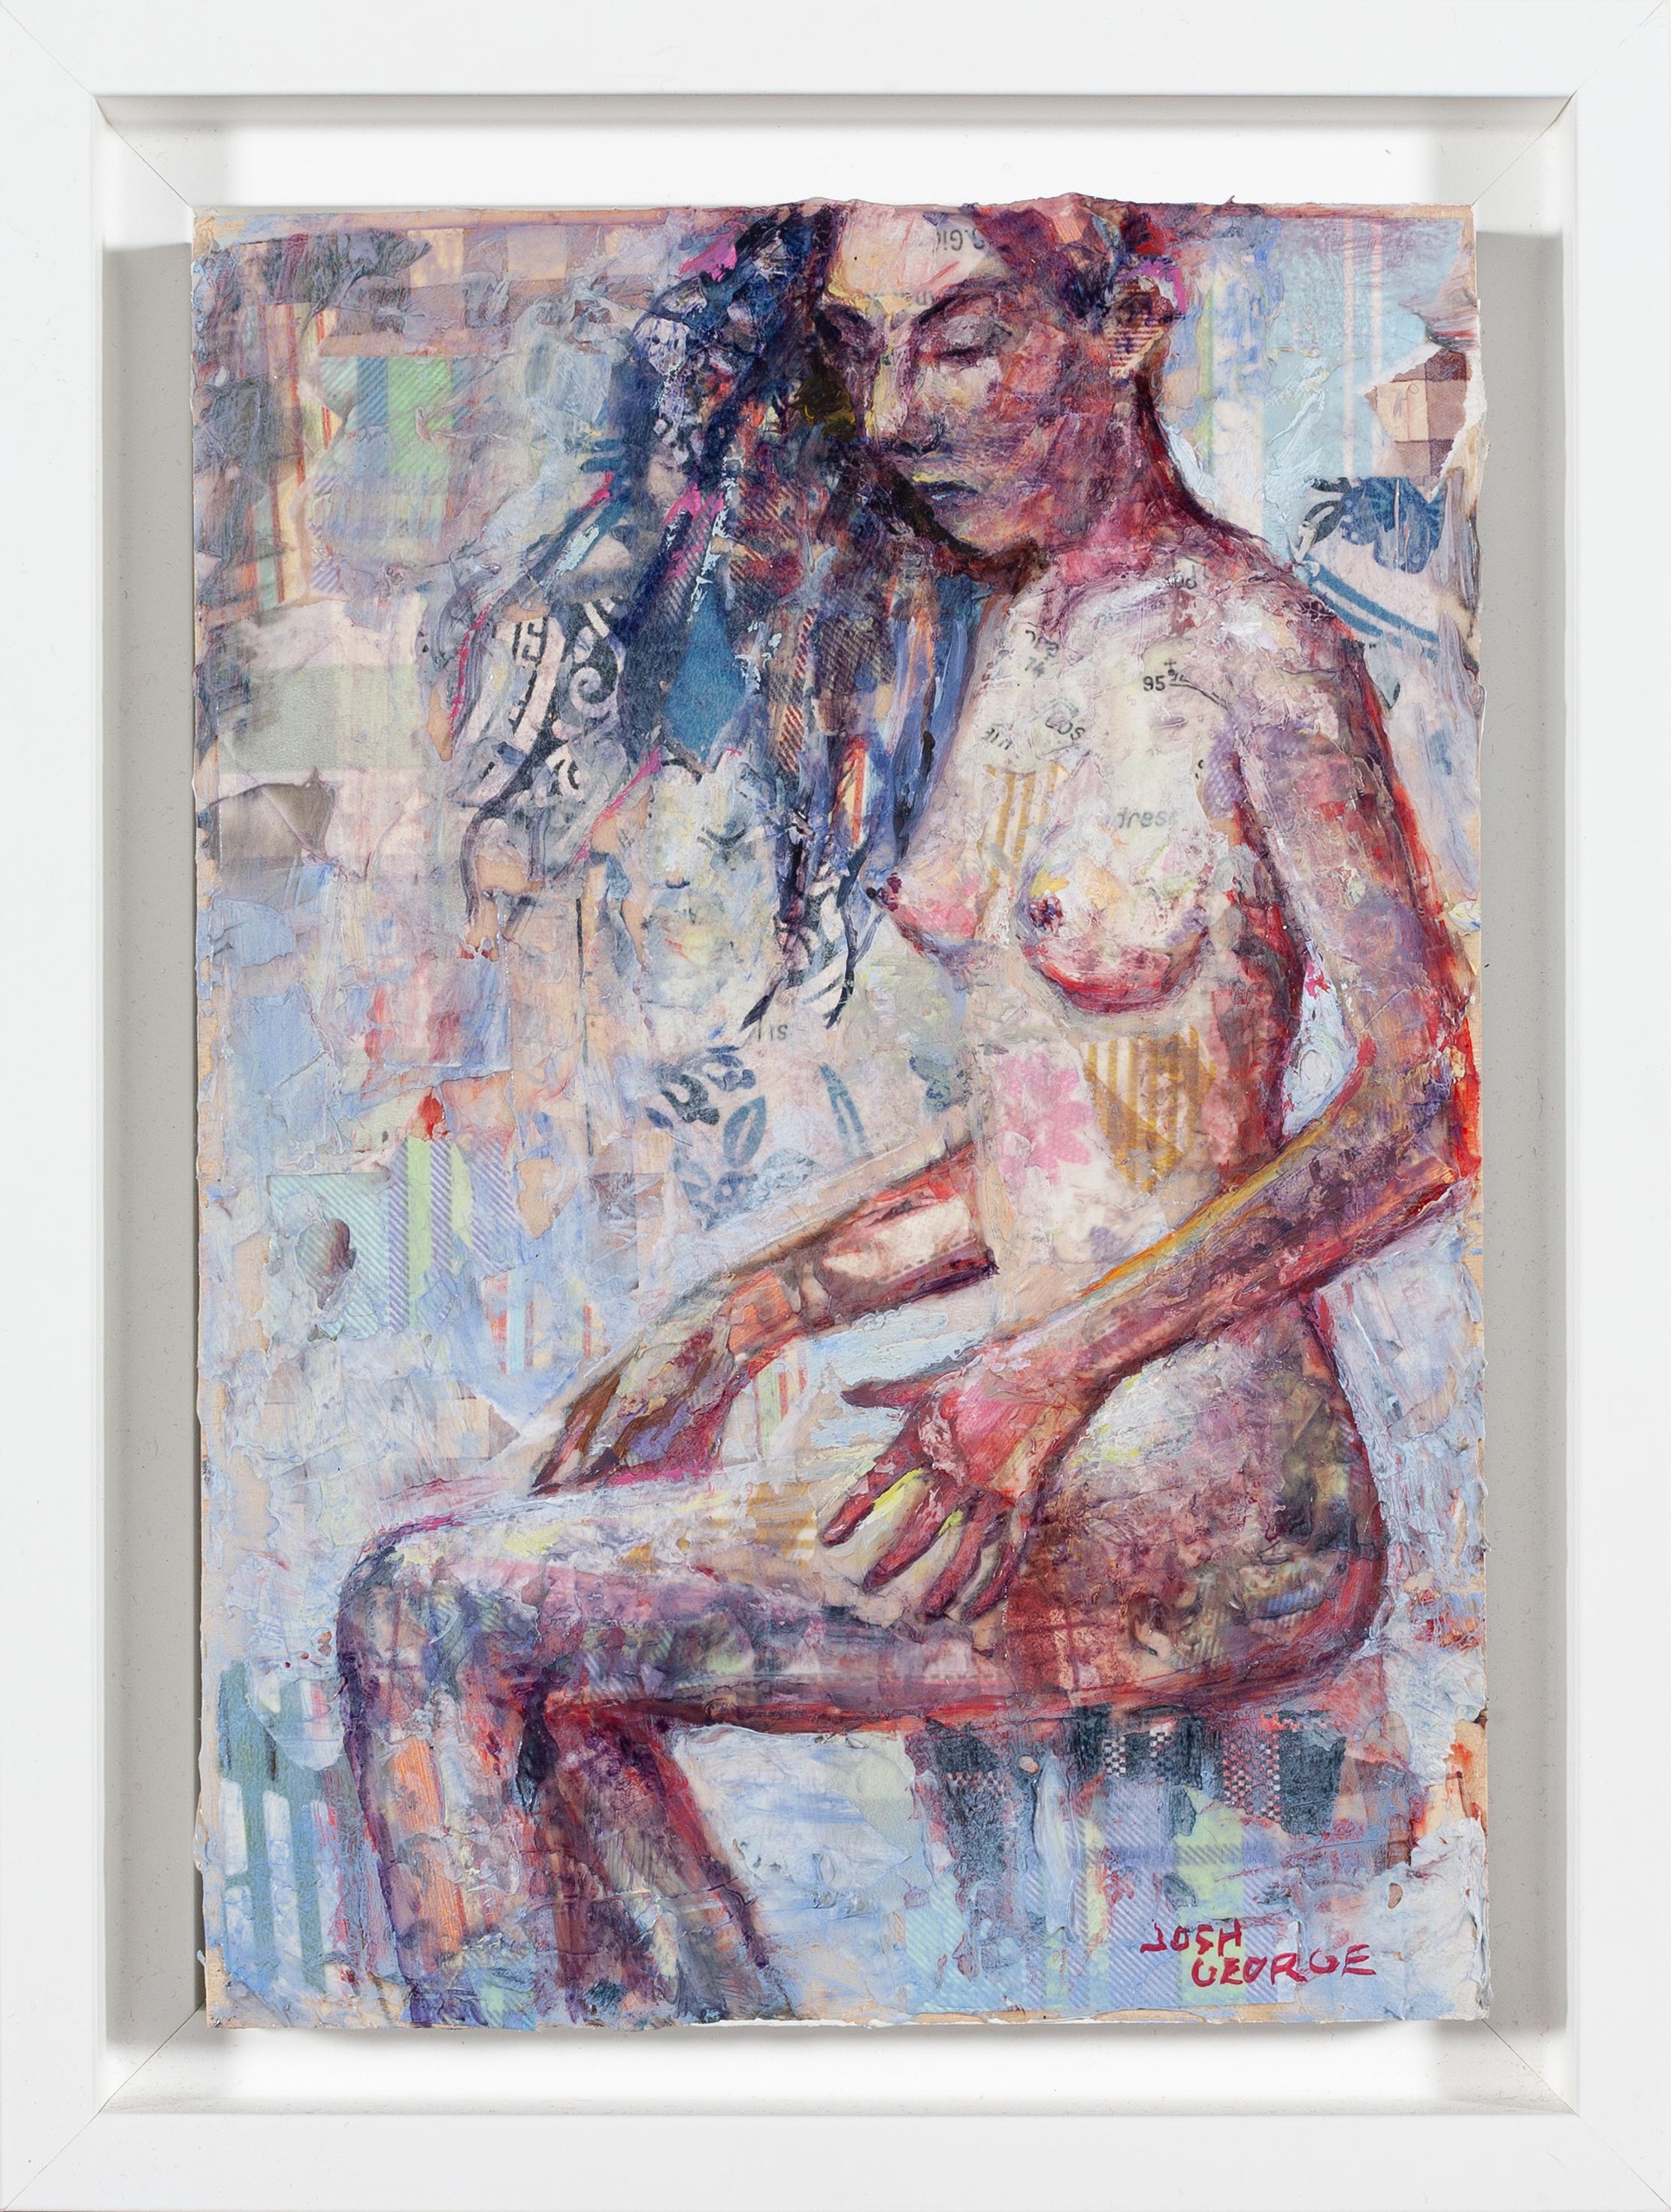 Josh George Nude Painting - Buckle Under the Flutter